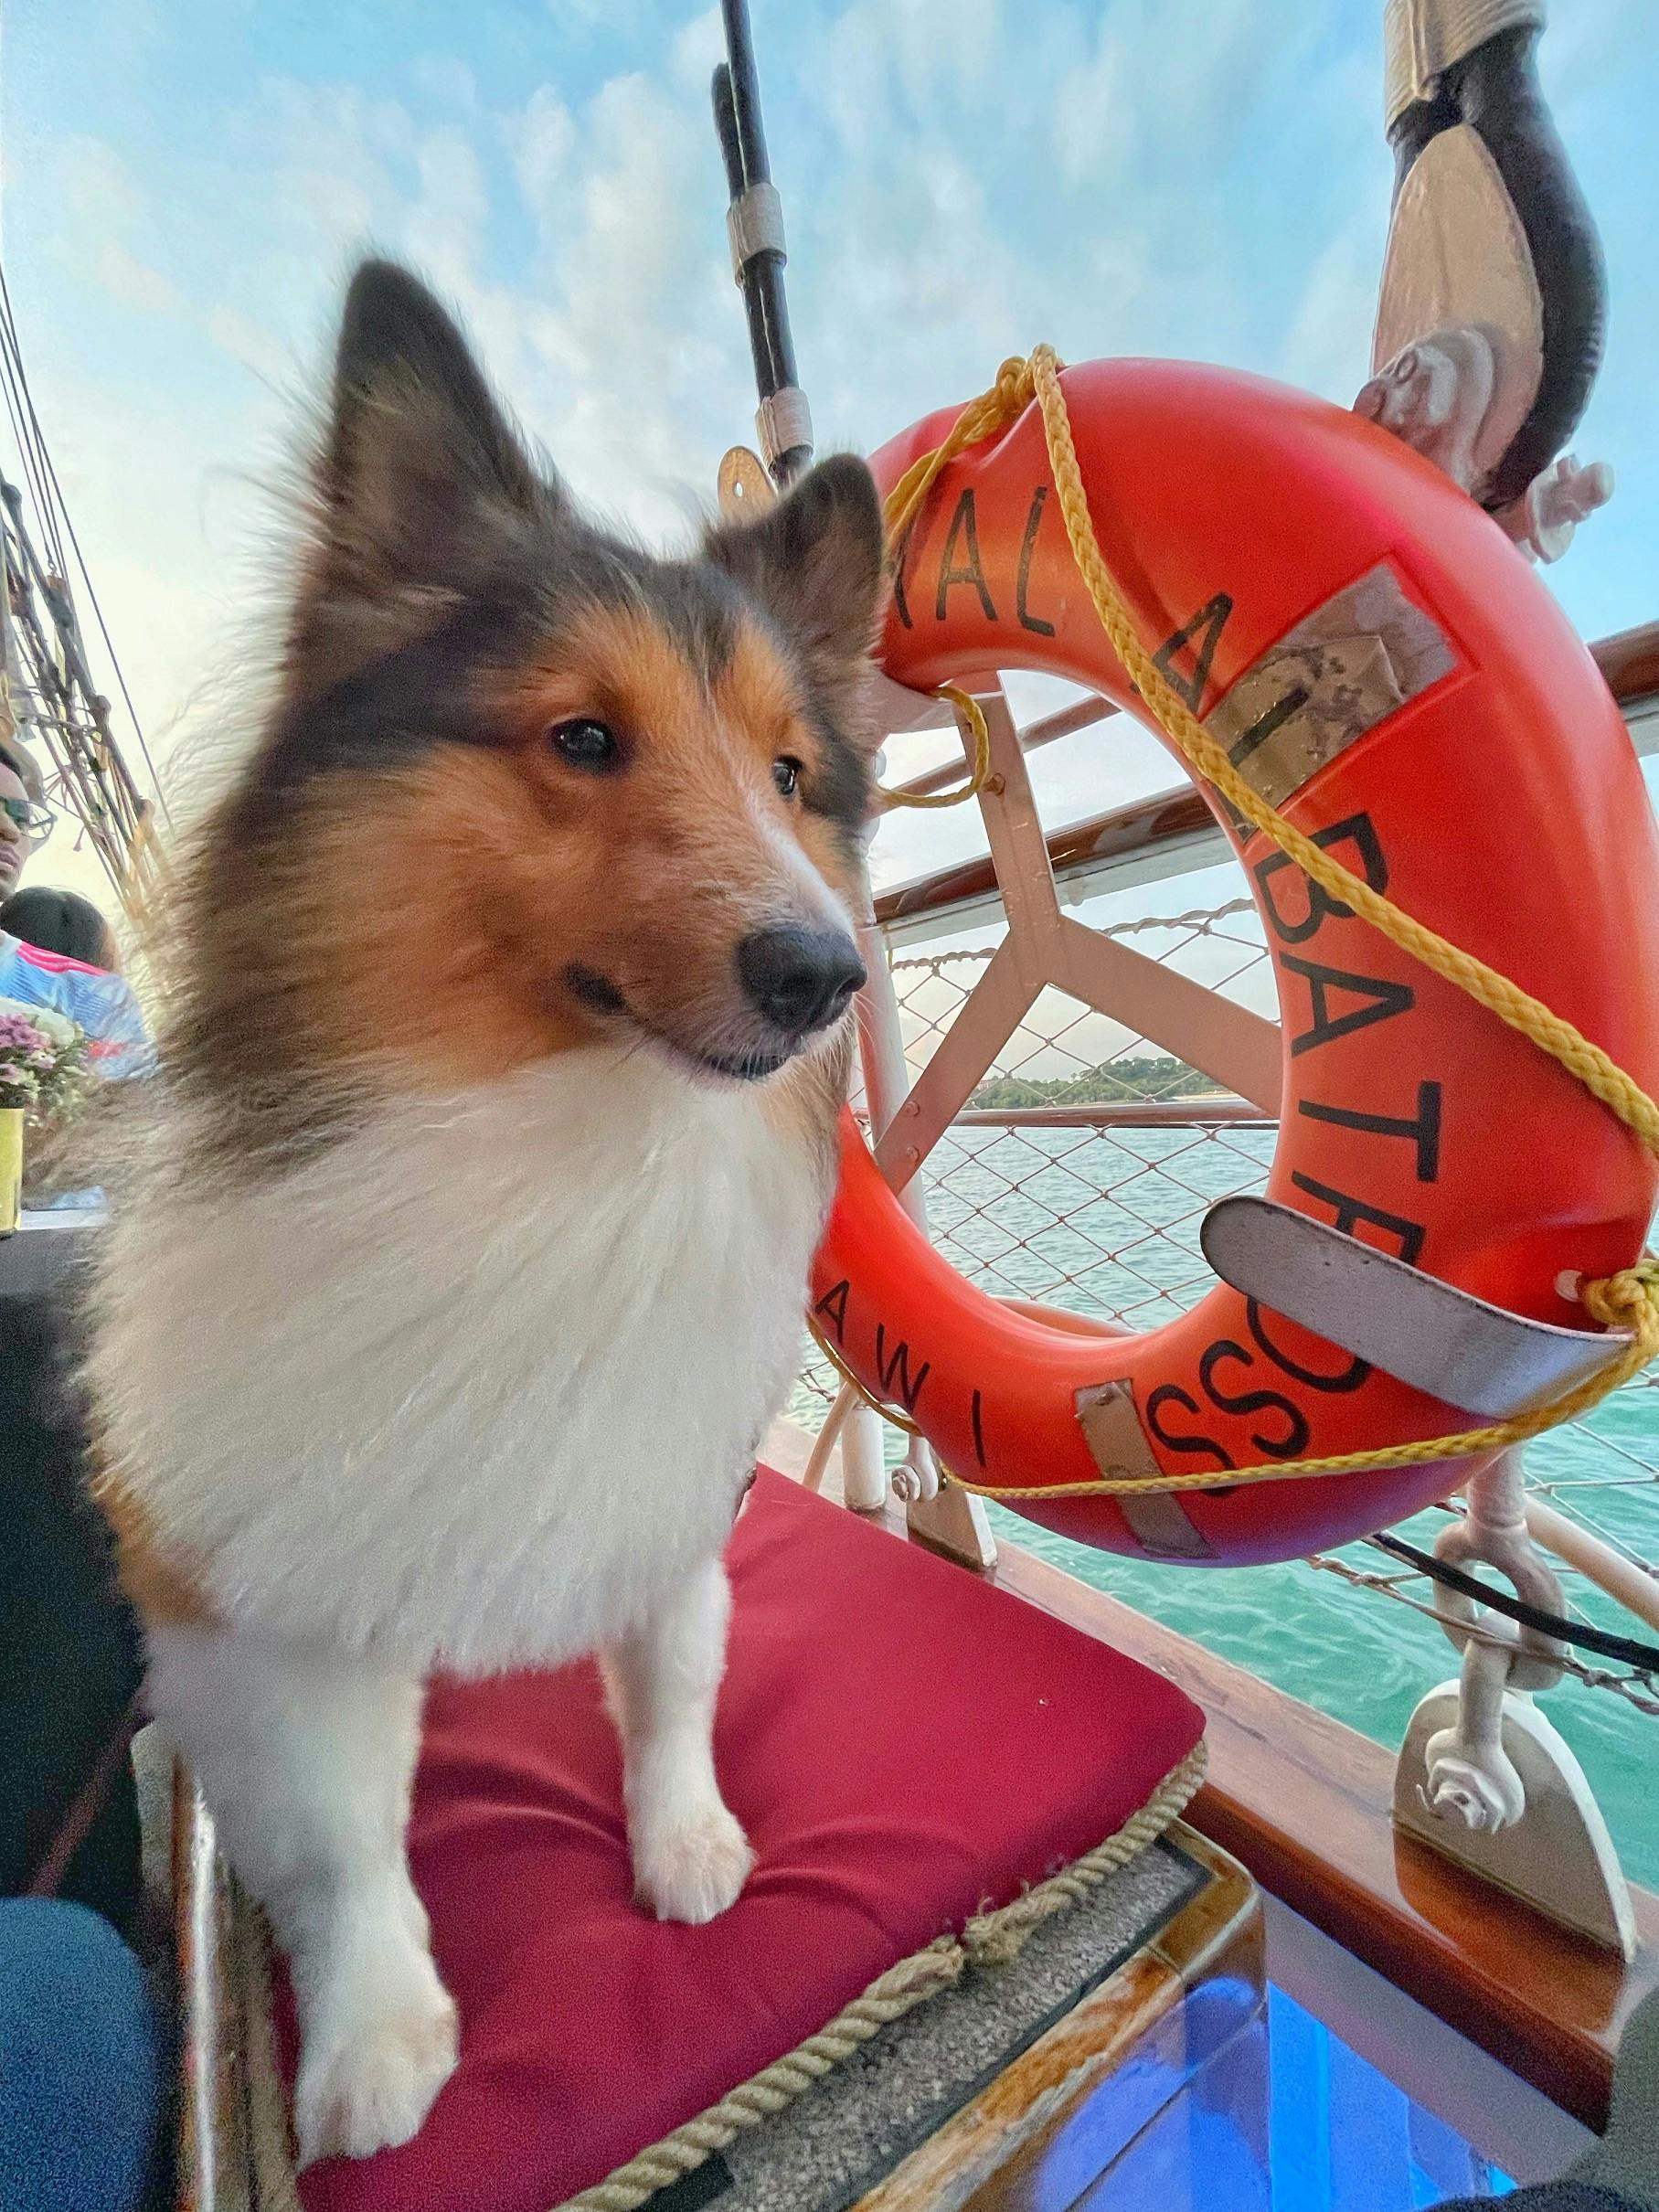 EmBARK on a majestic dog cruise aboard the Royal Albatross with Olliewoof_Sheltie